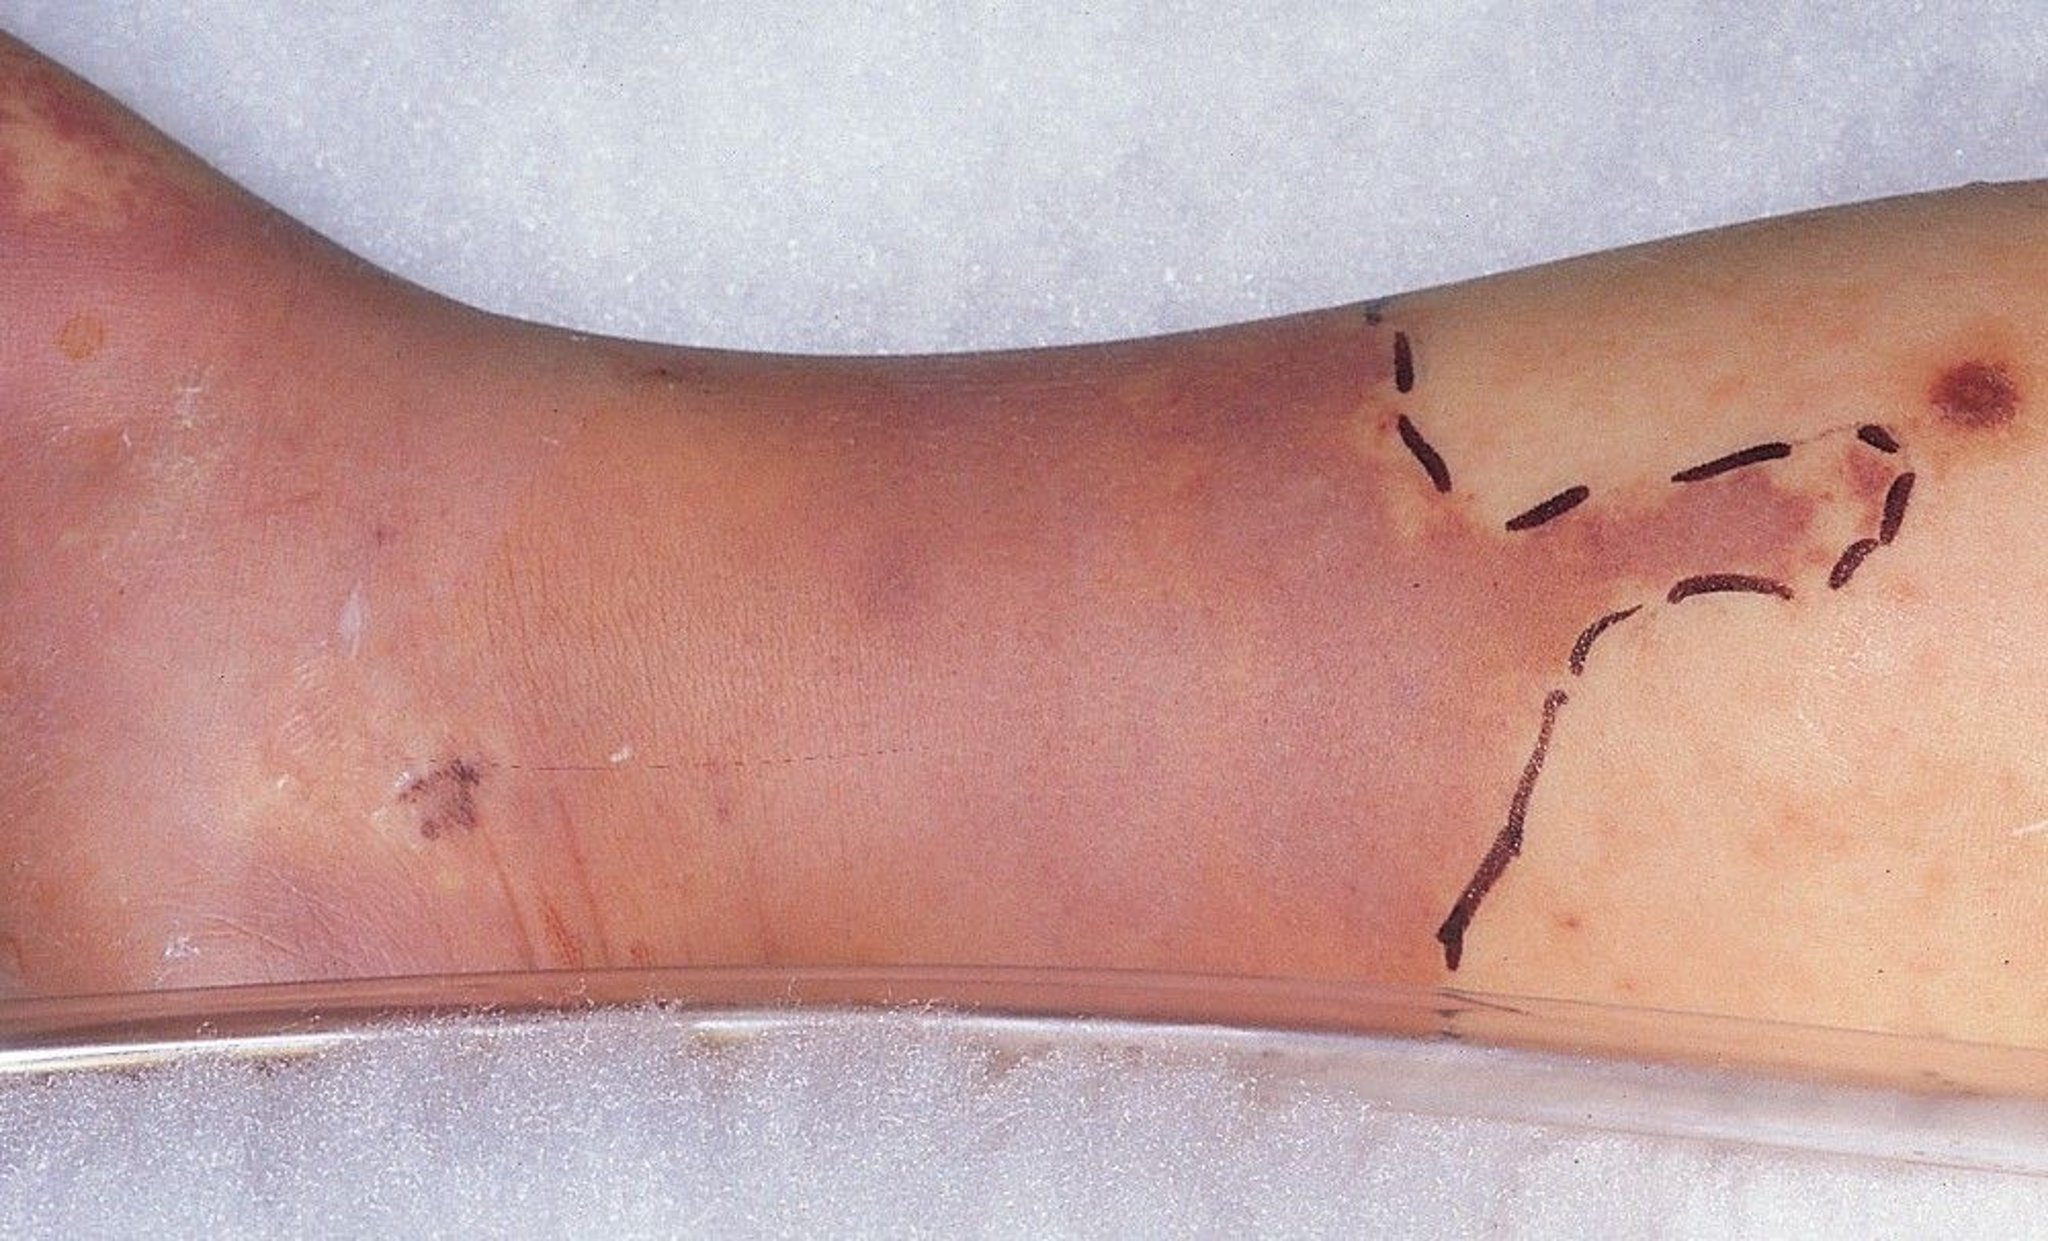 Cellulitis Due to Bacterial Infection